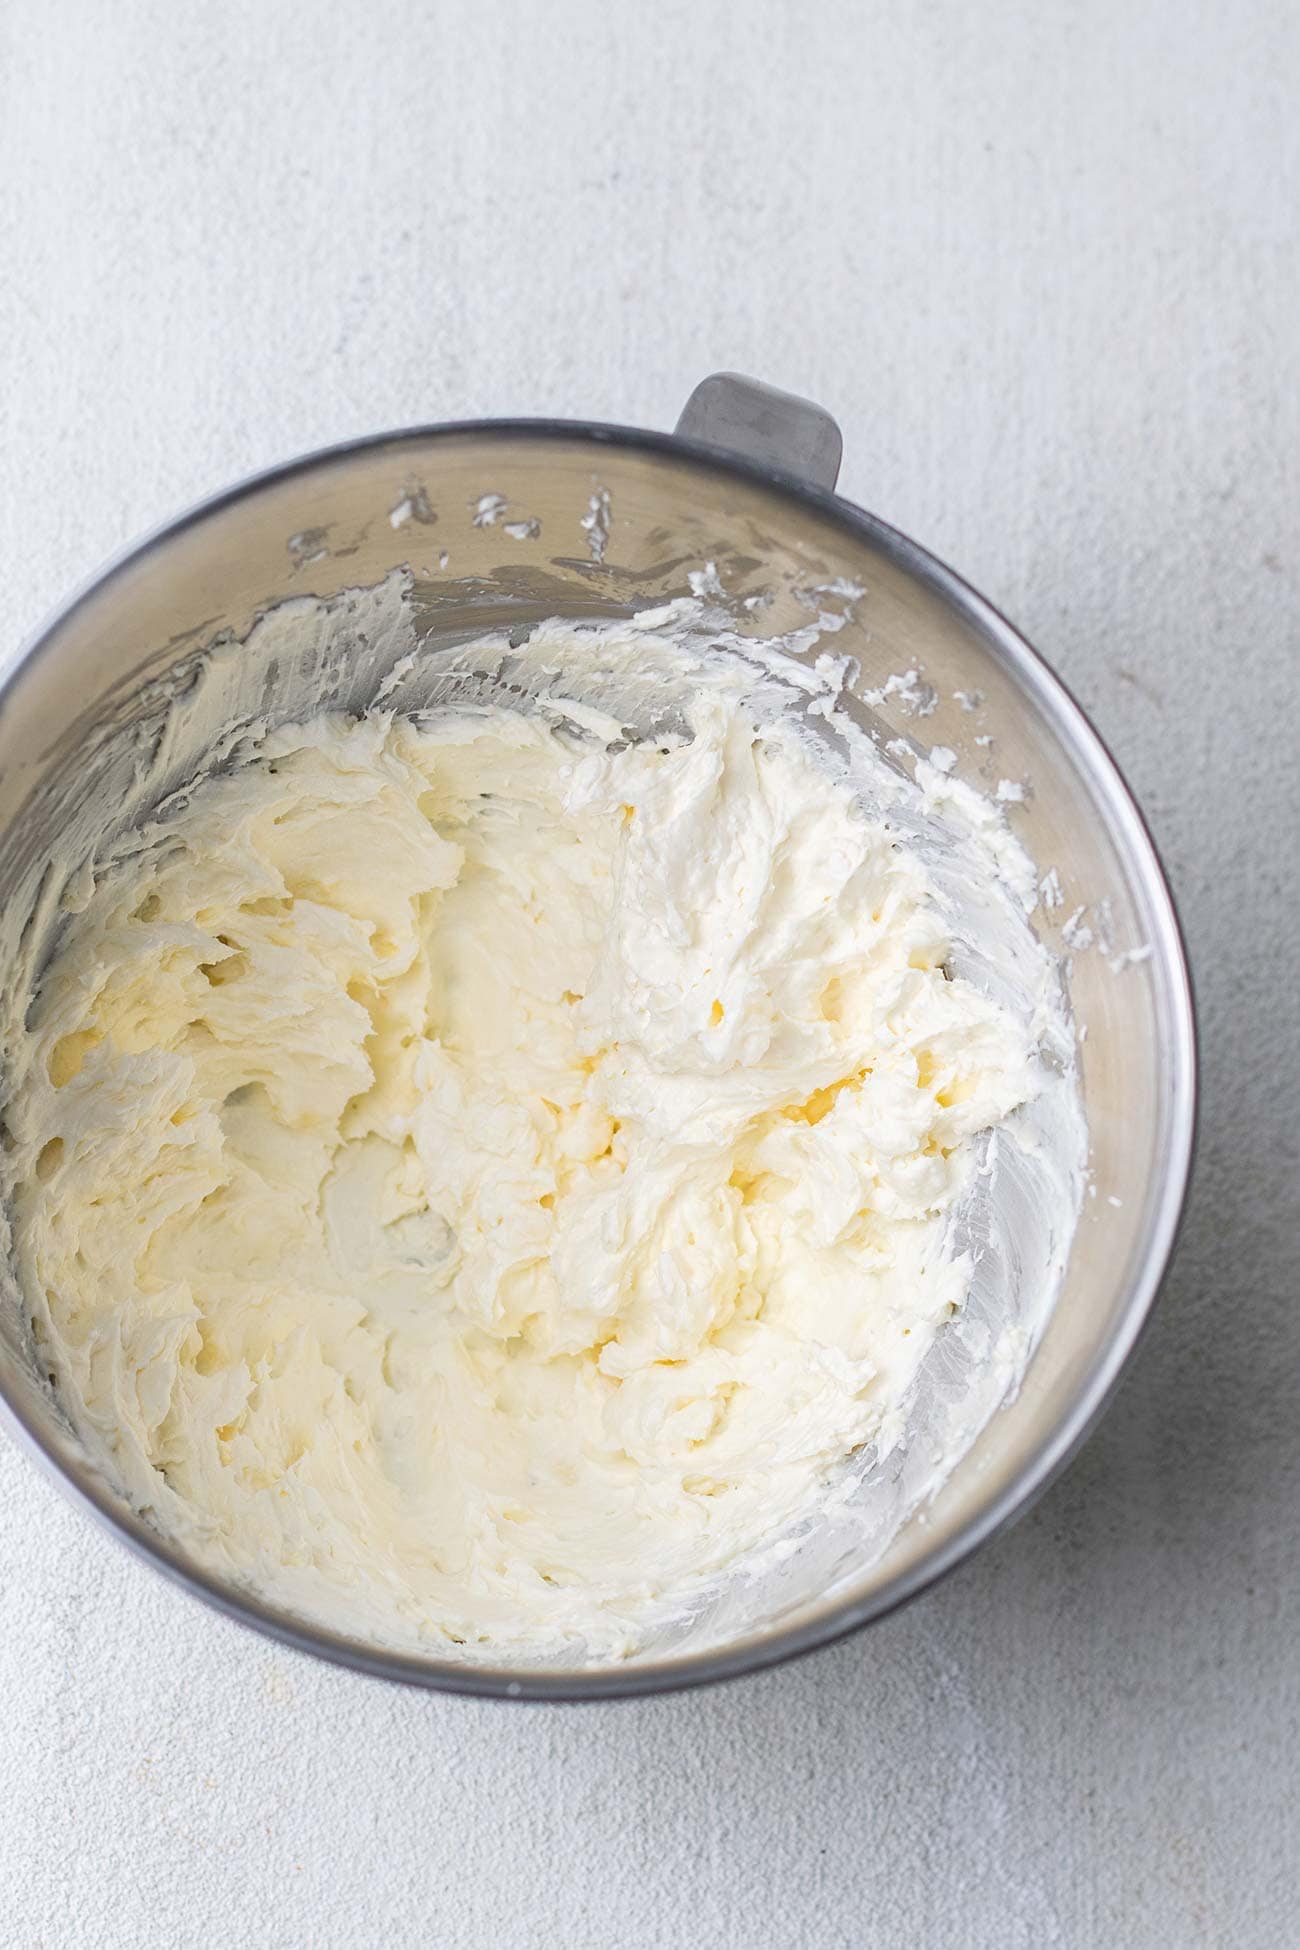 Cream cheese and butter shown whipped together in a bowl.